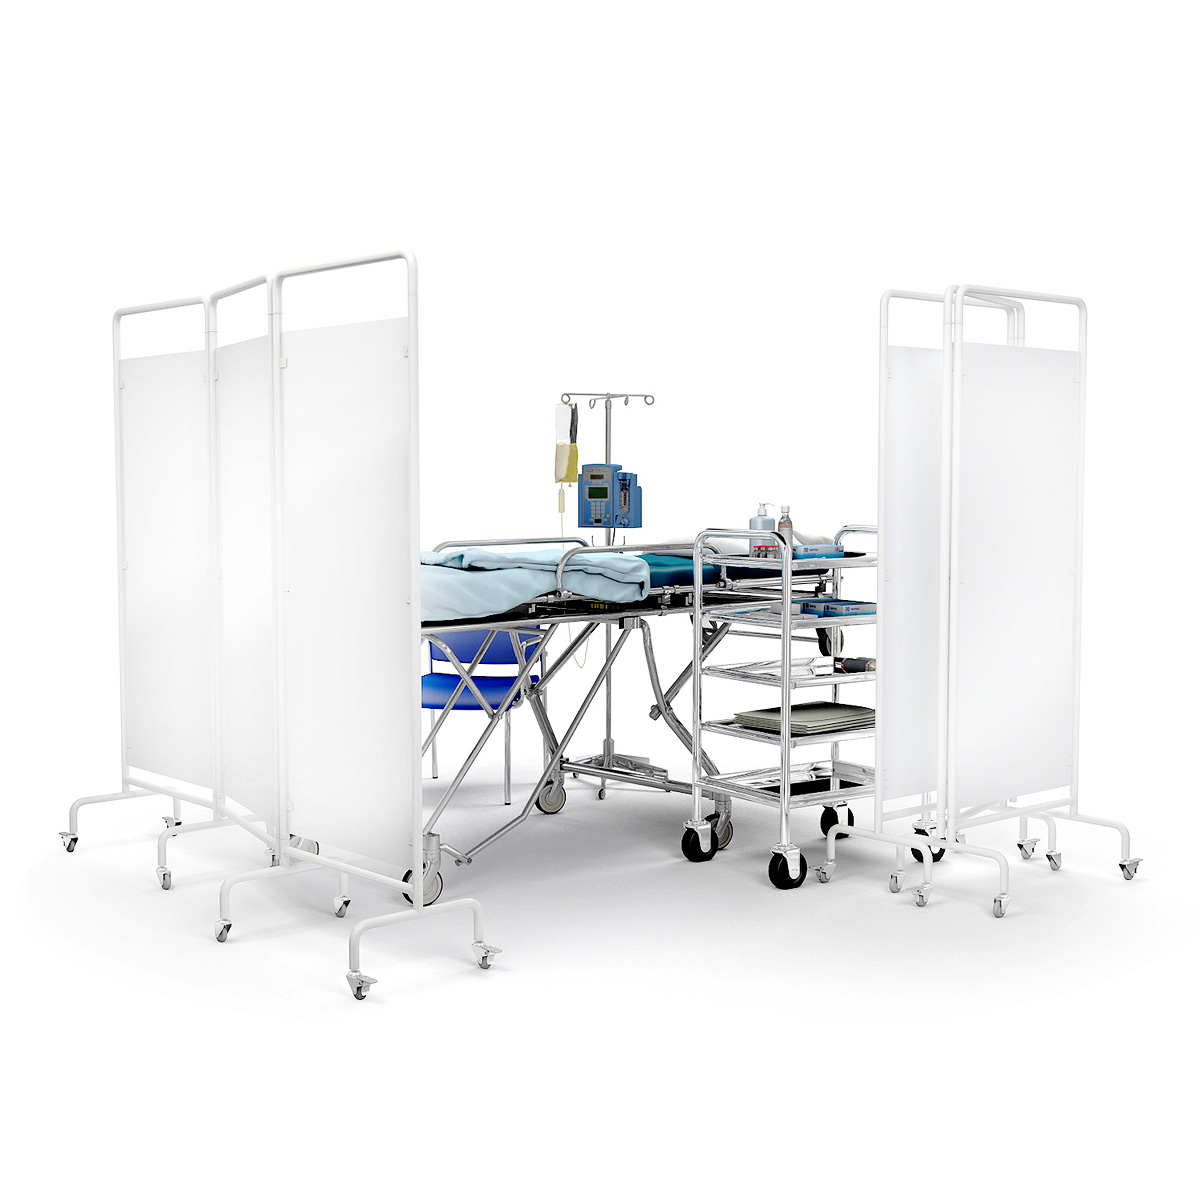 DIGNITY® Portable Medical Screens Ideal For Medical Wards And ICU Units